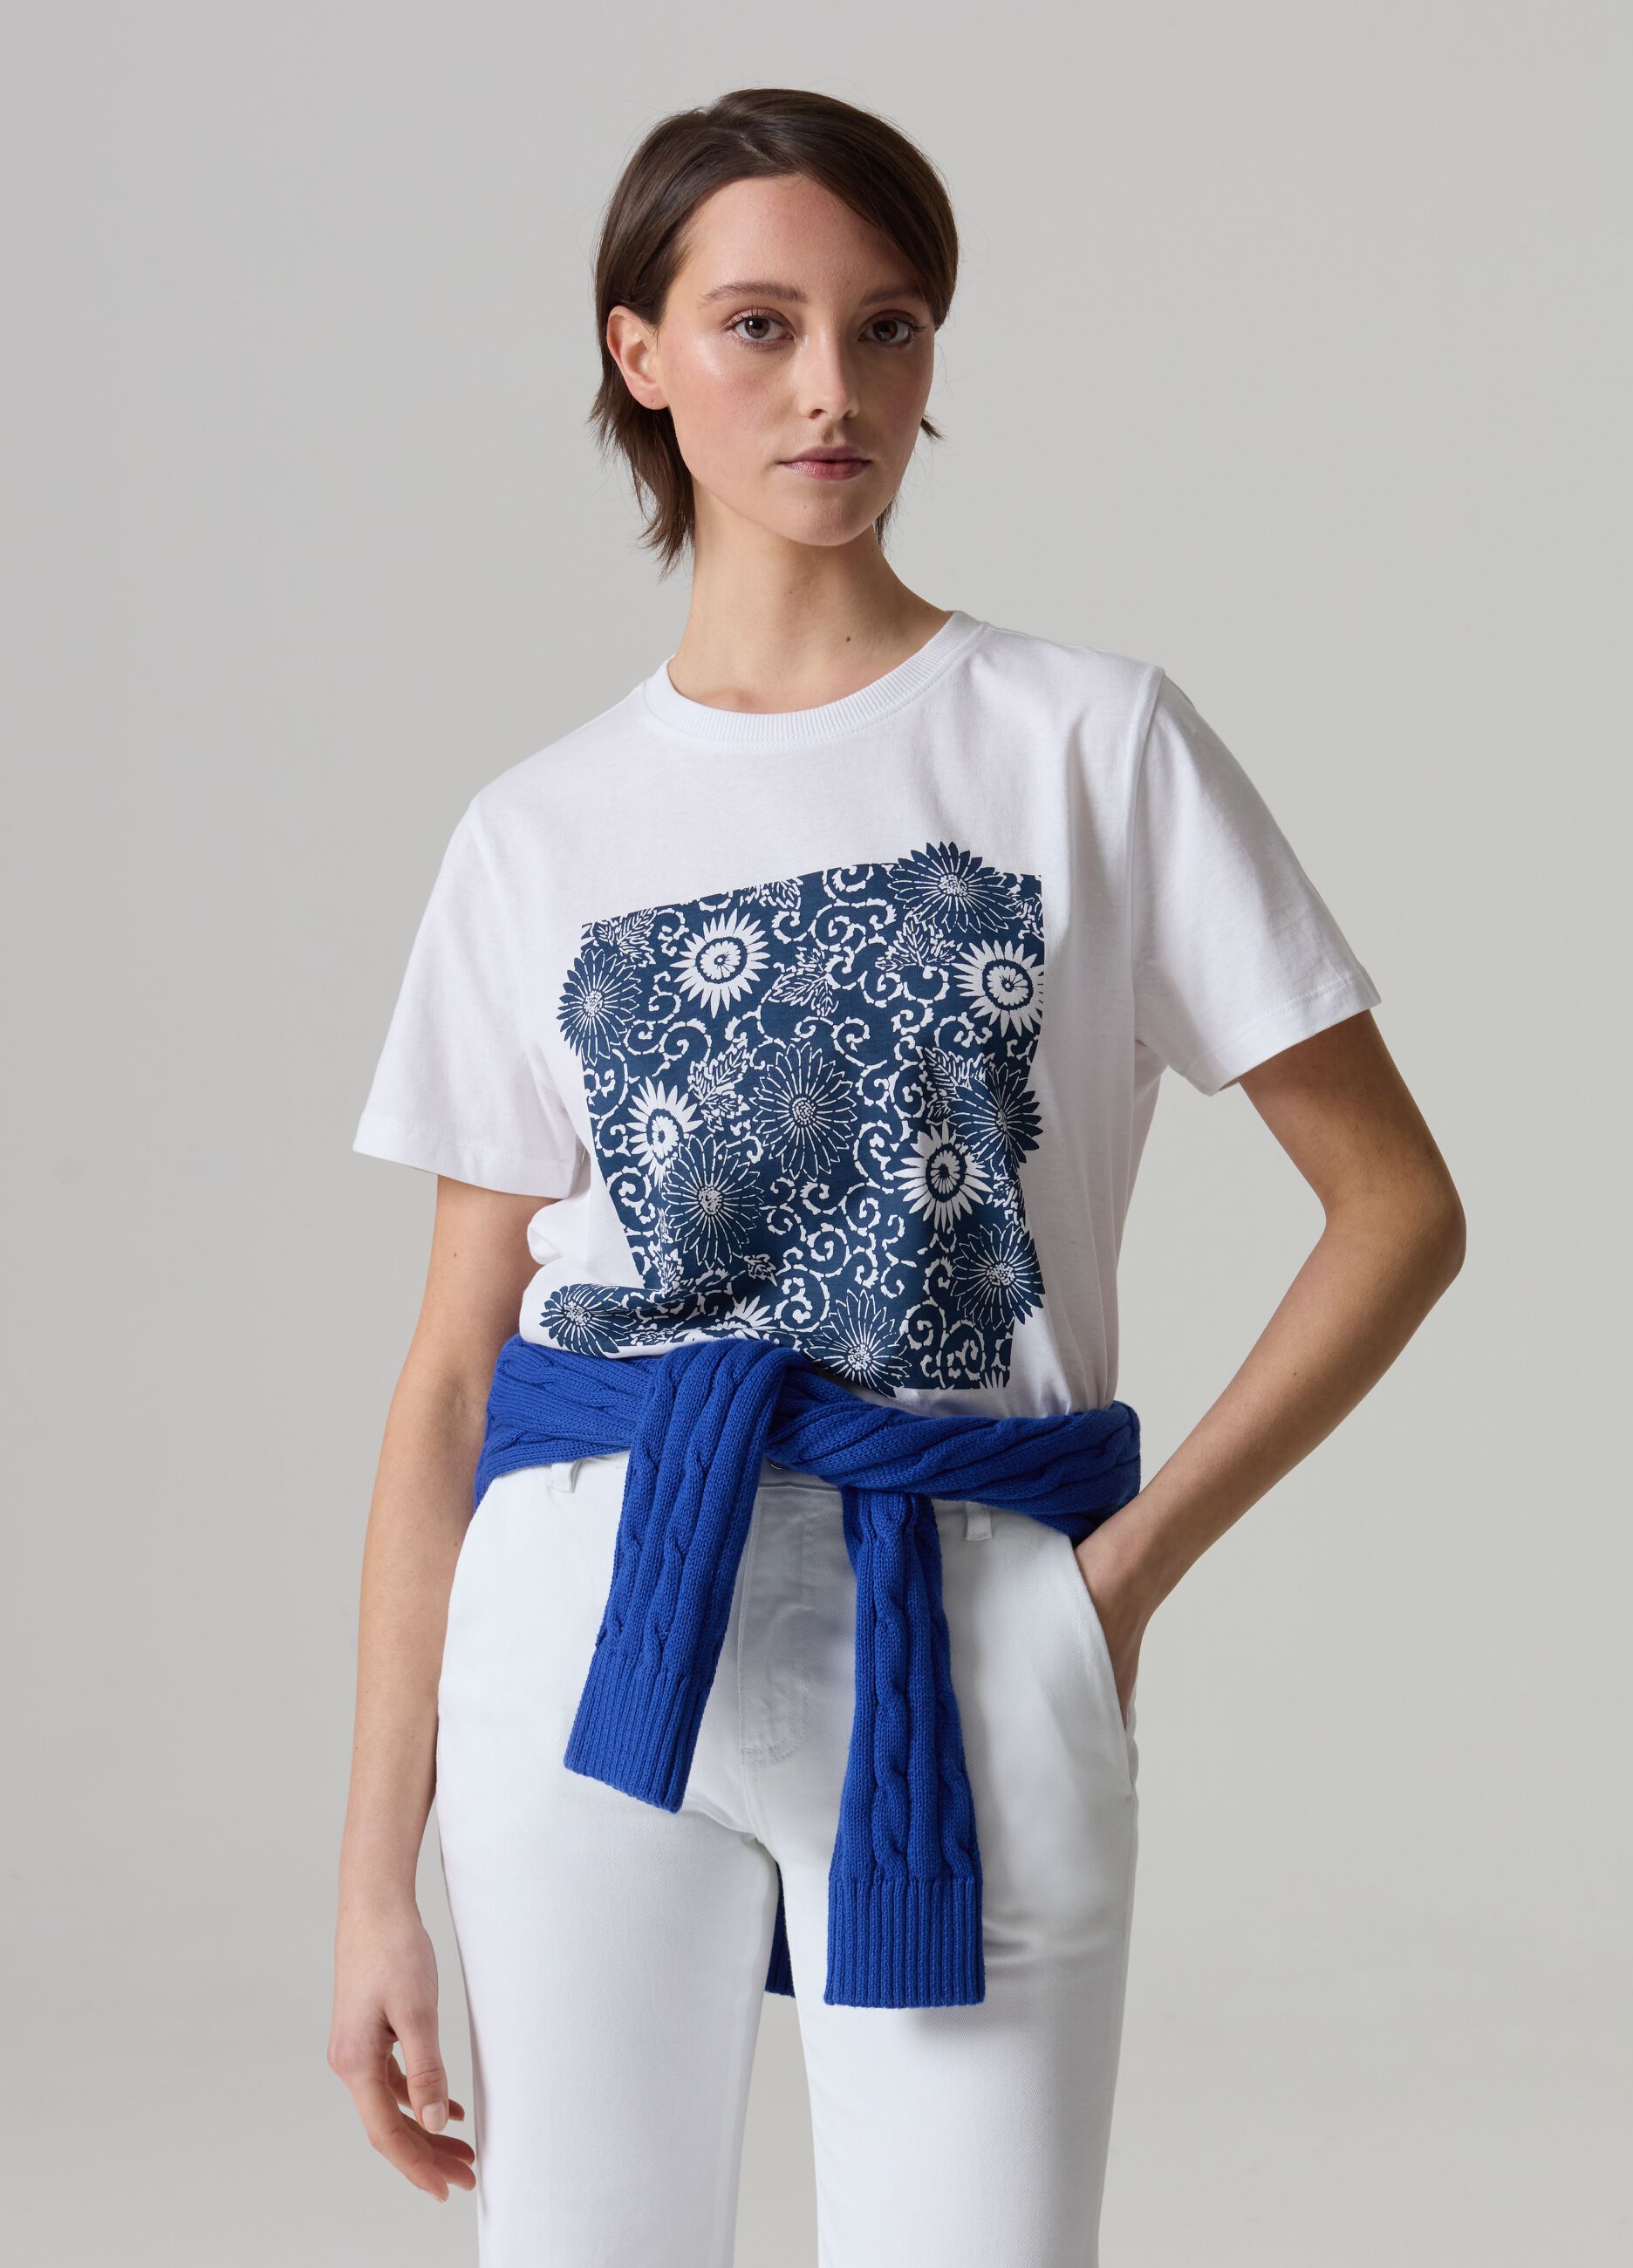 Organic cotton T-shirt with floral print